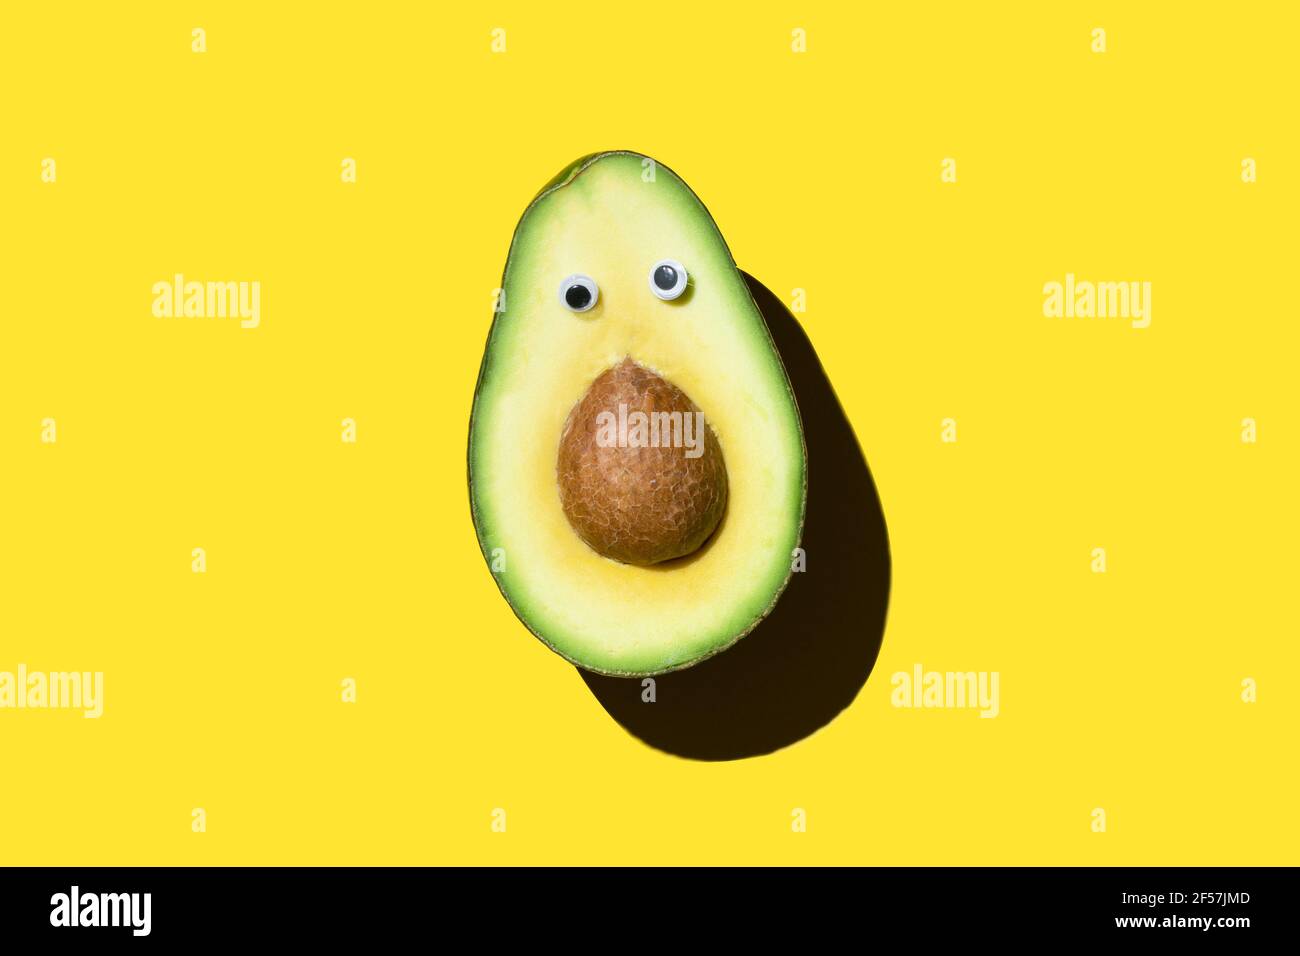 Concept of censorship avocado with a seed and eyes Stock Photo